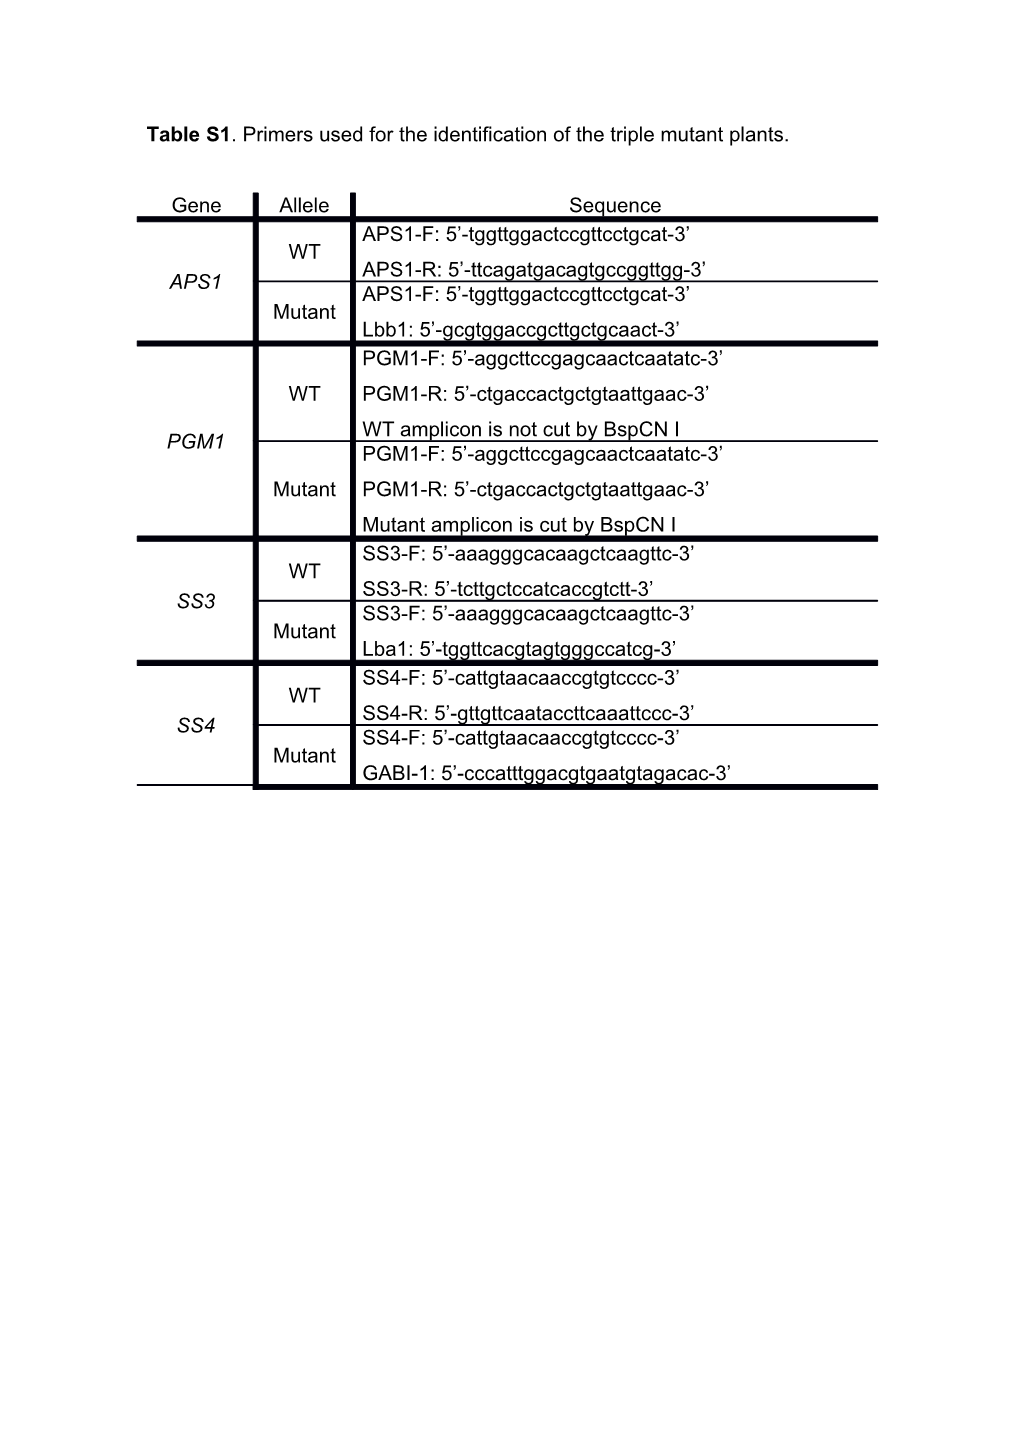 Table S1. Primers Used for the Identification of the Triple Mutant Plants